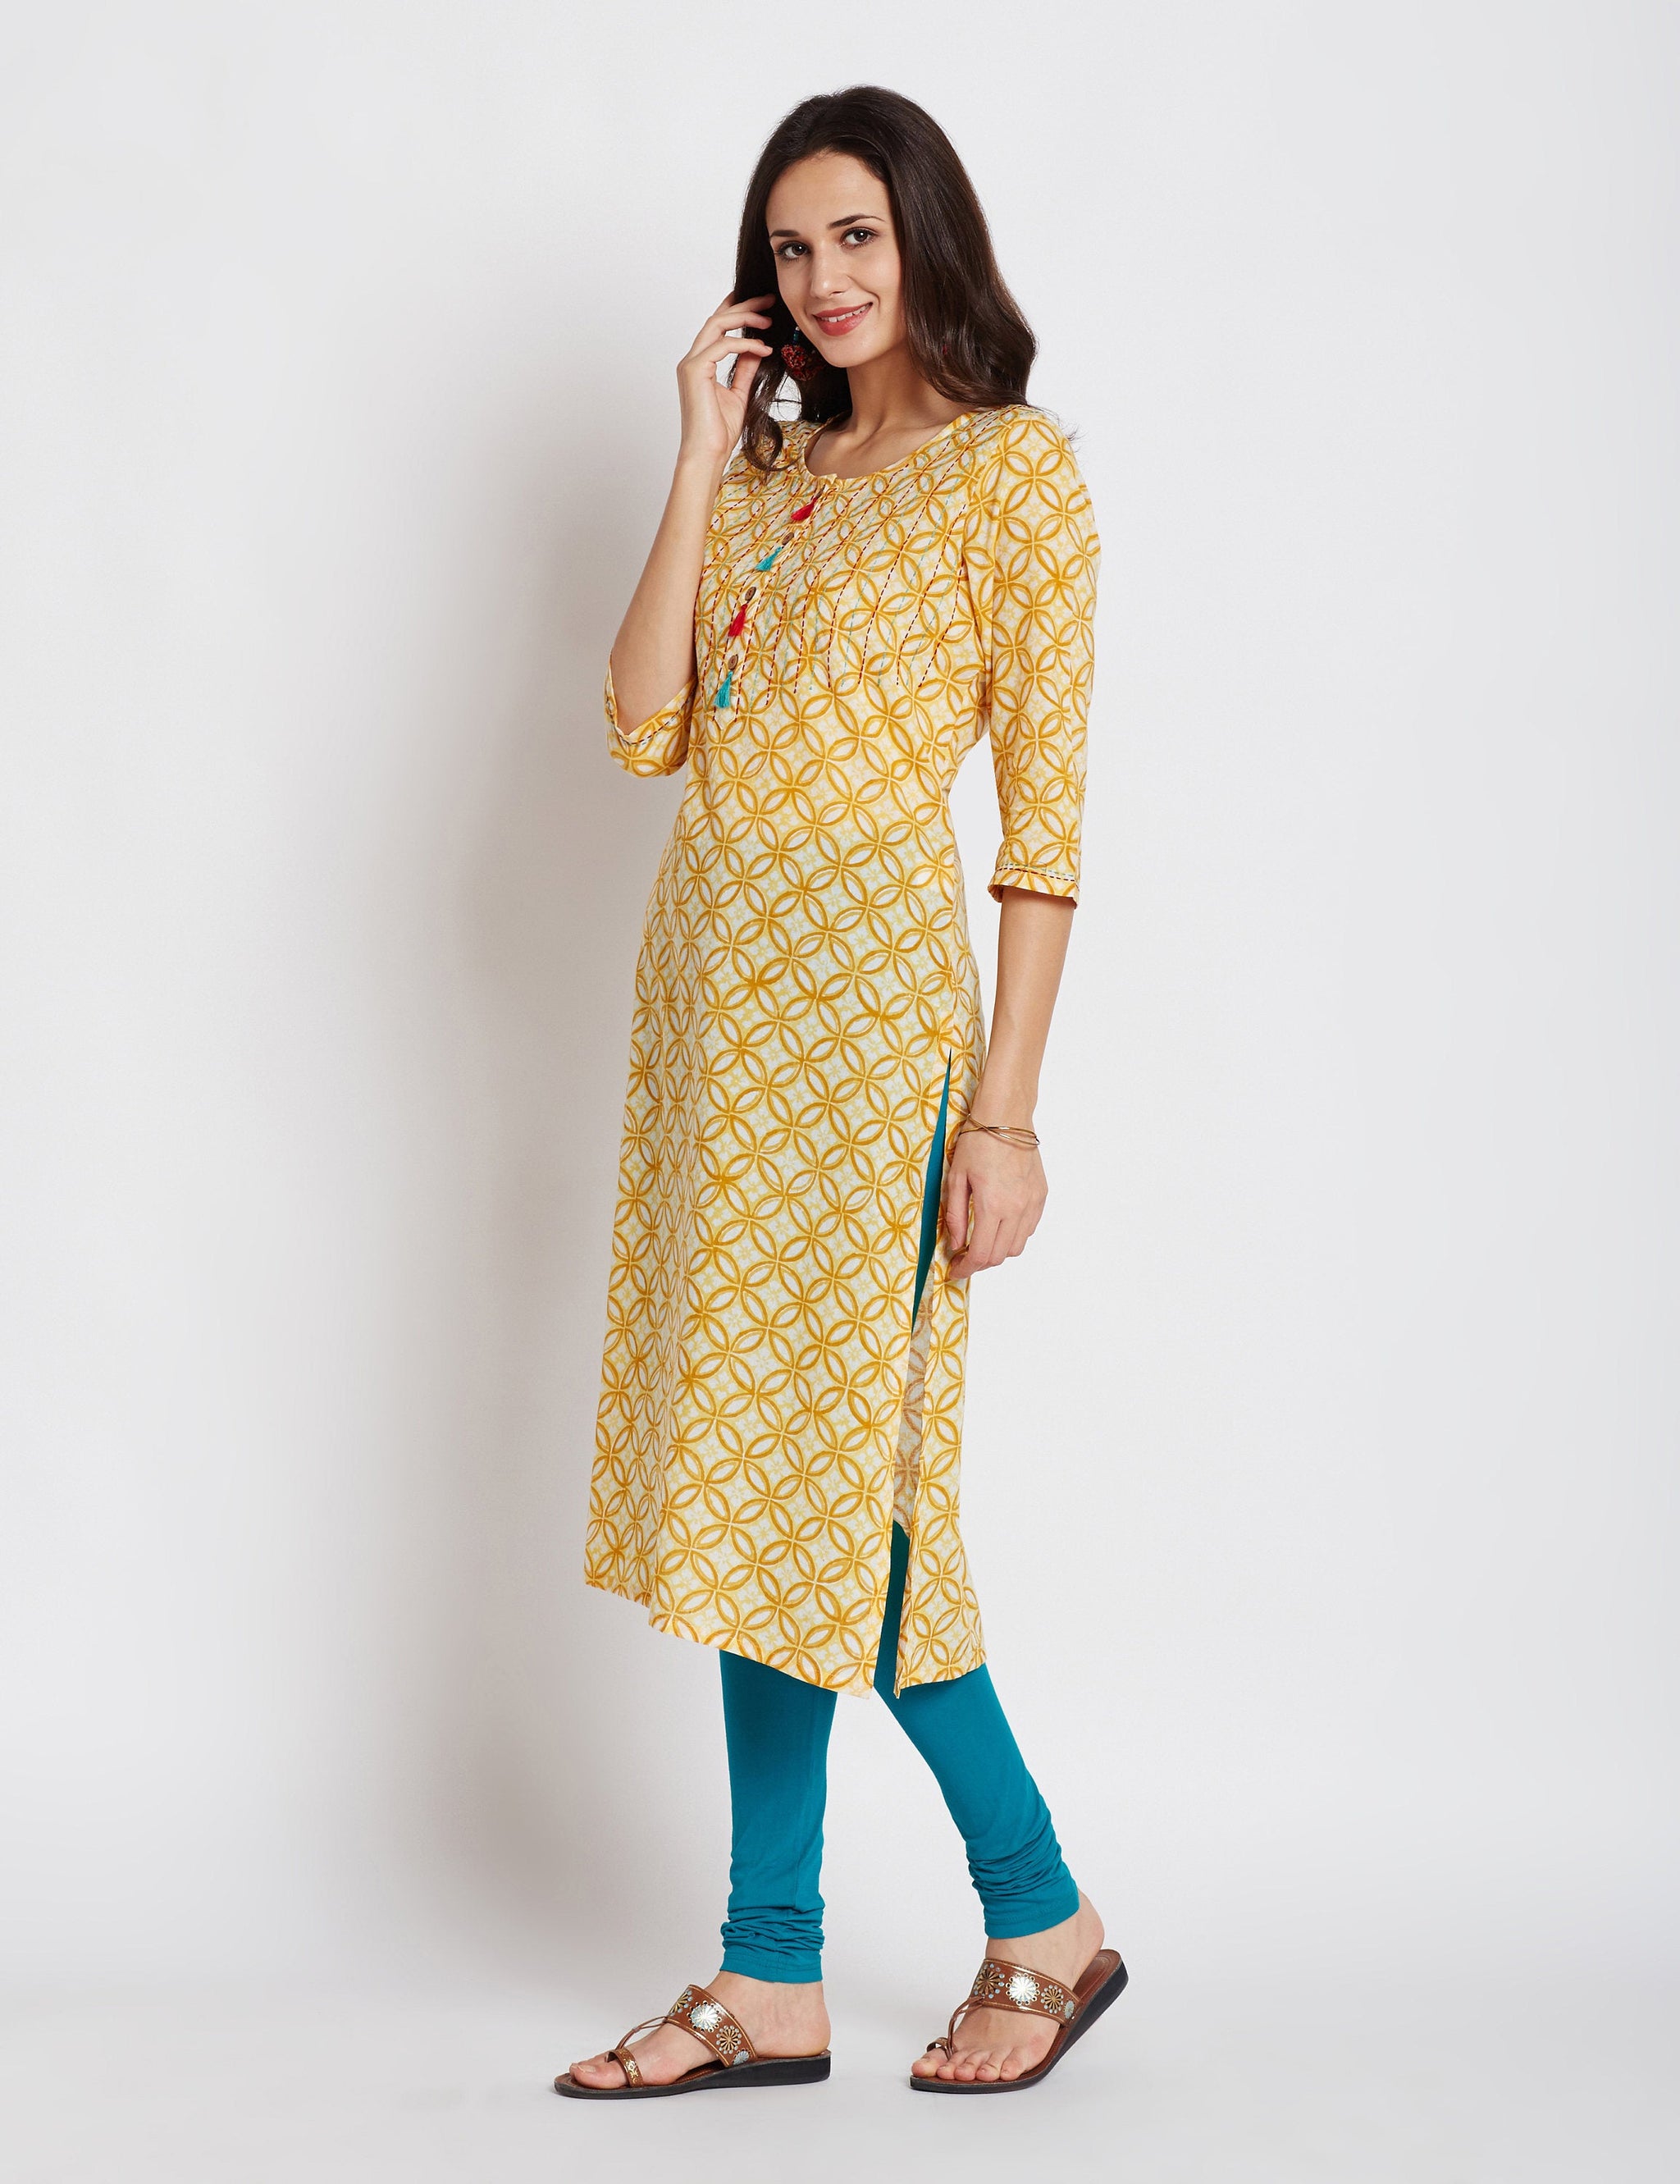 Hand block printed ethnic long Indian pocket kurta with kantha hand embroidery & tassels on front placket